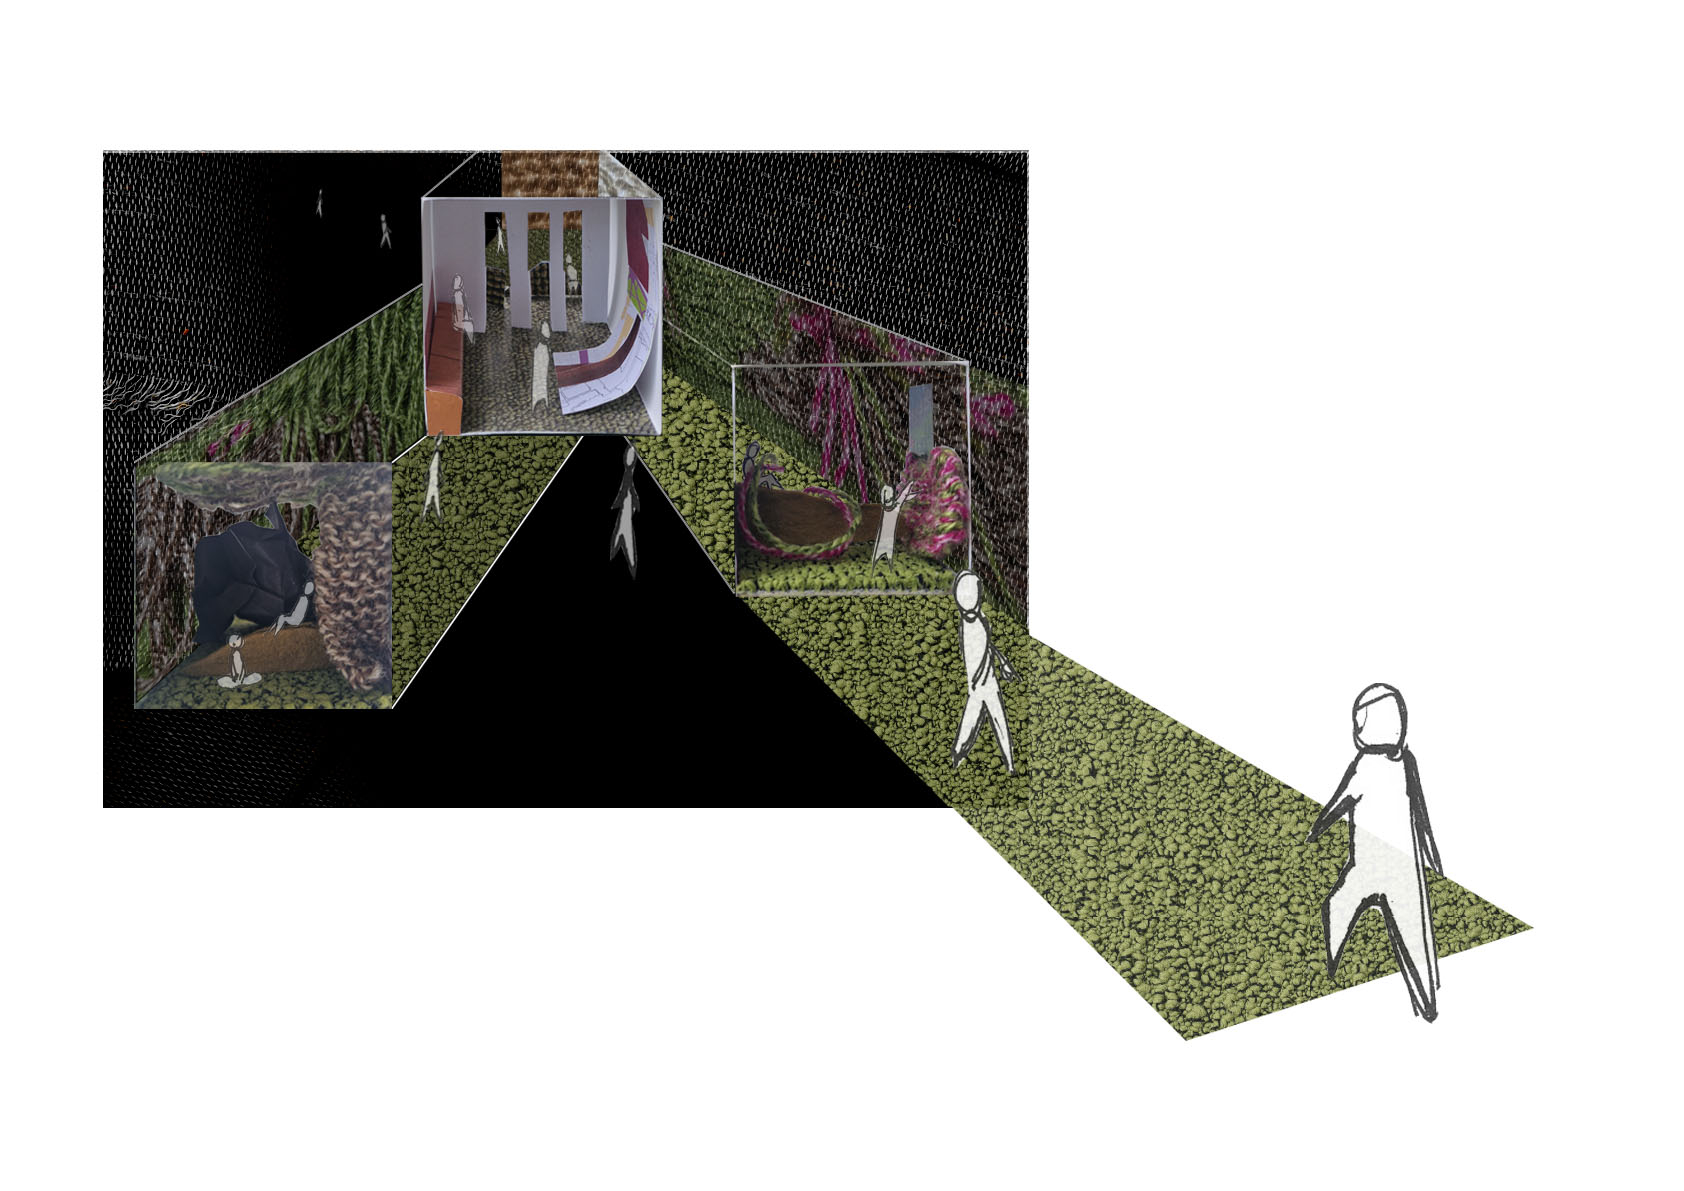 Image of people stepping onto a path heading into 3 spaces 